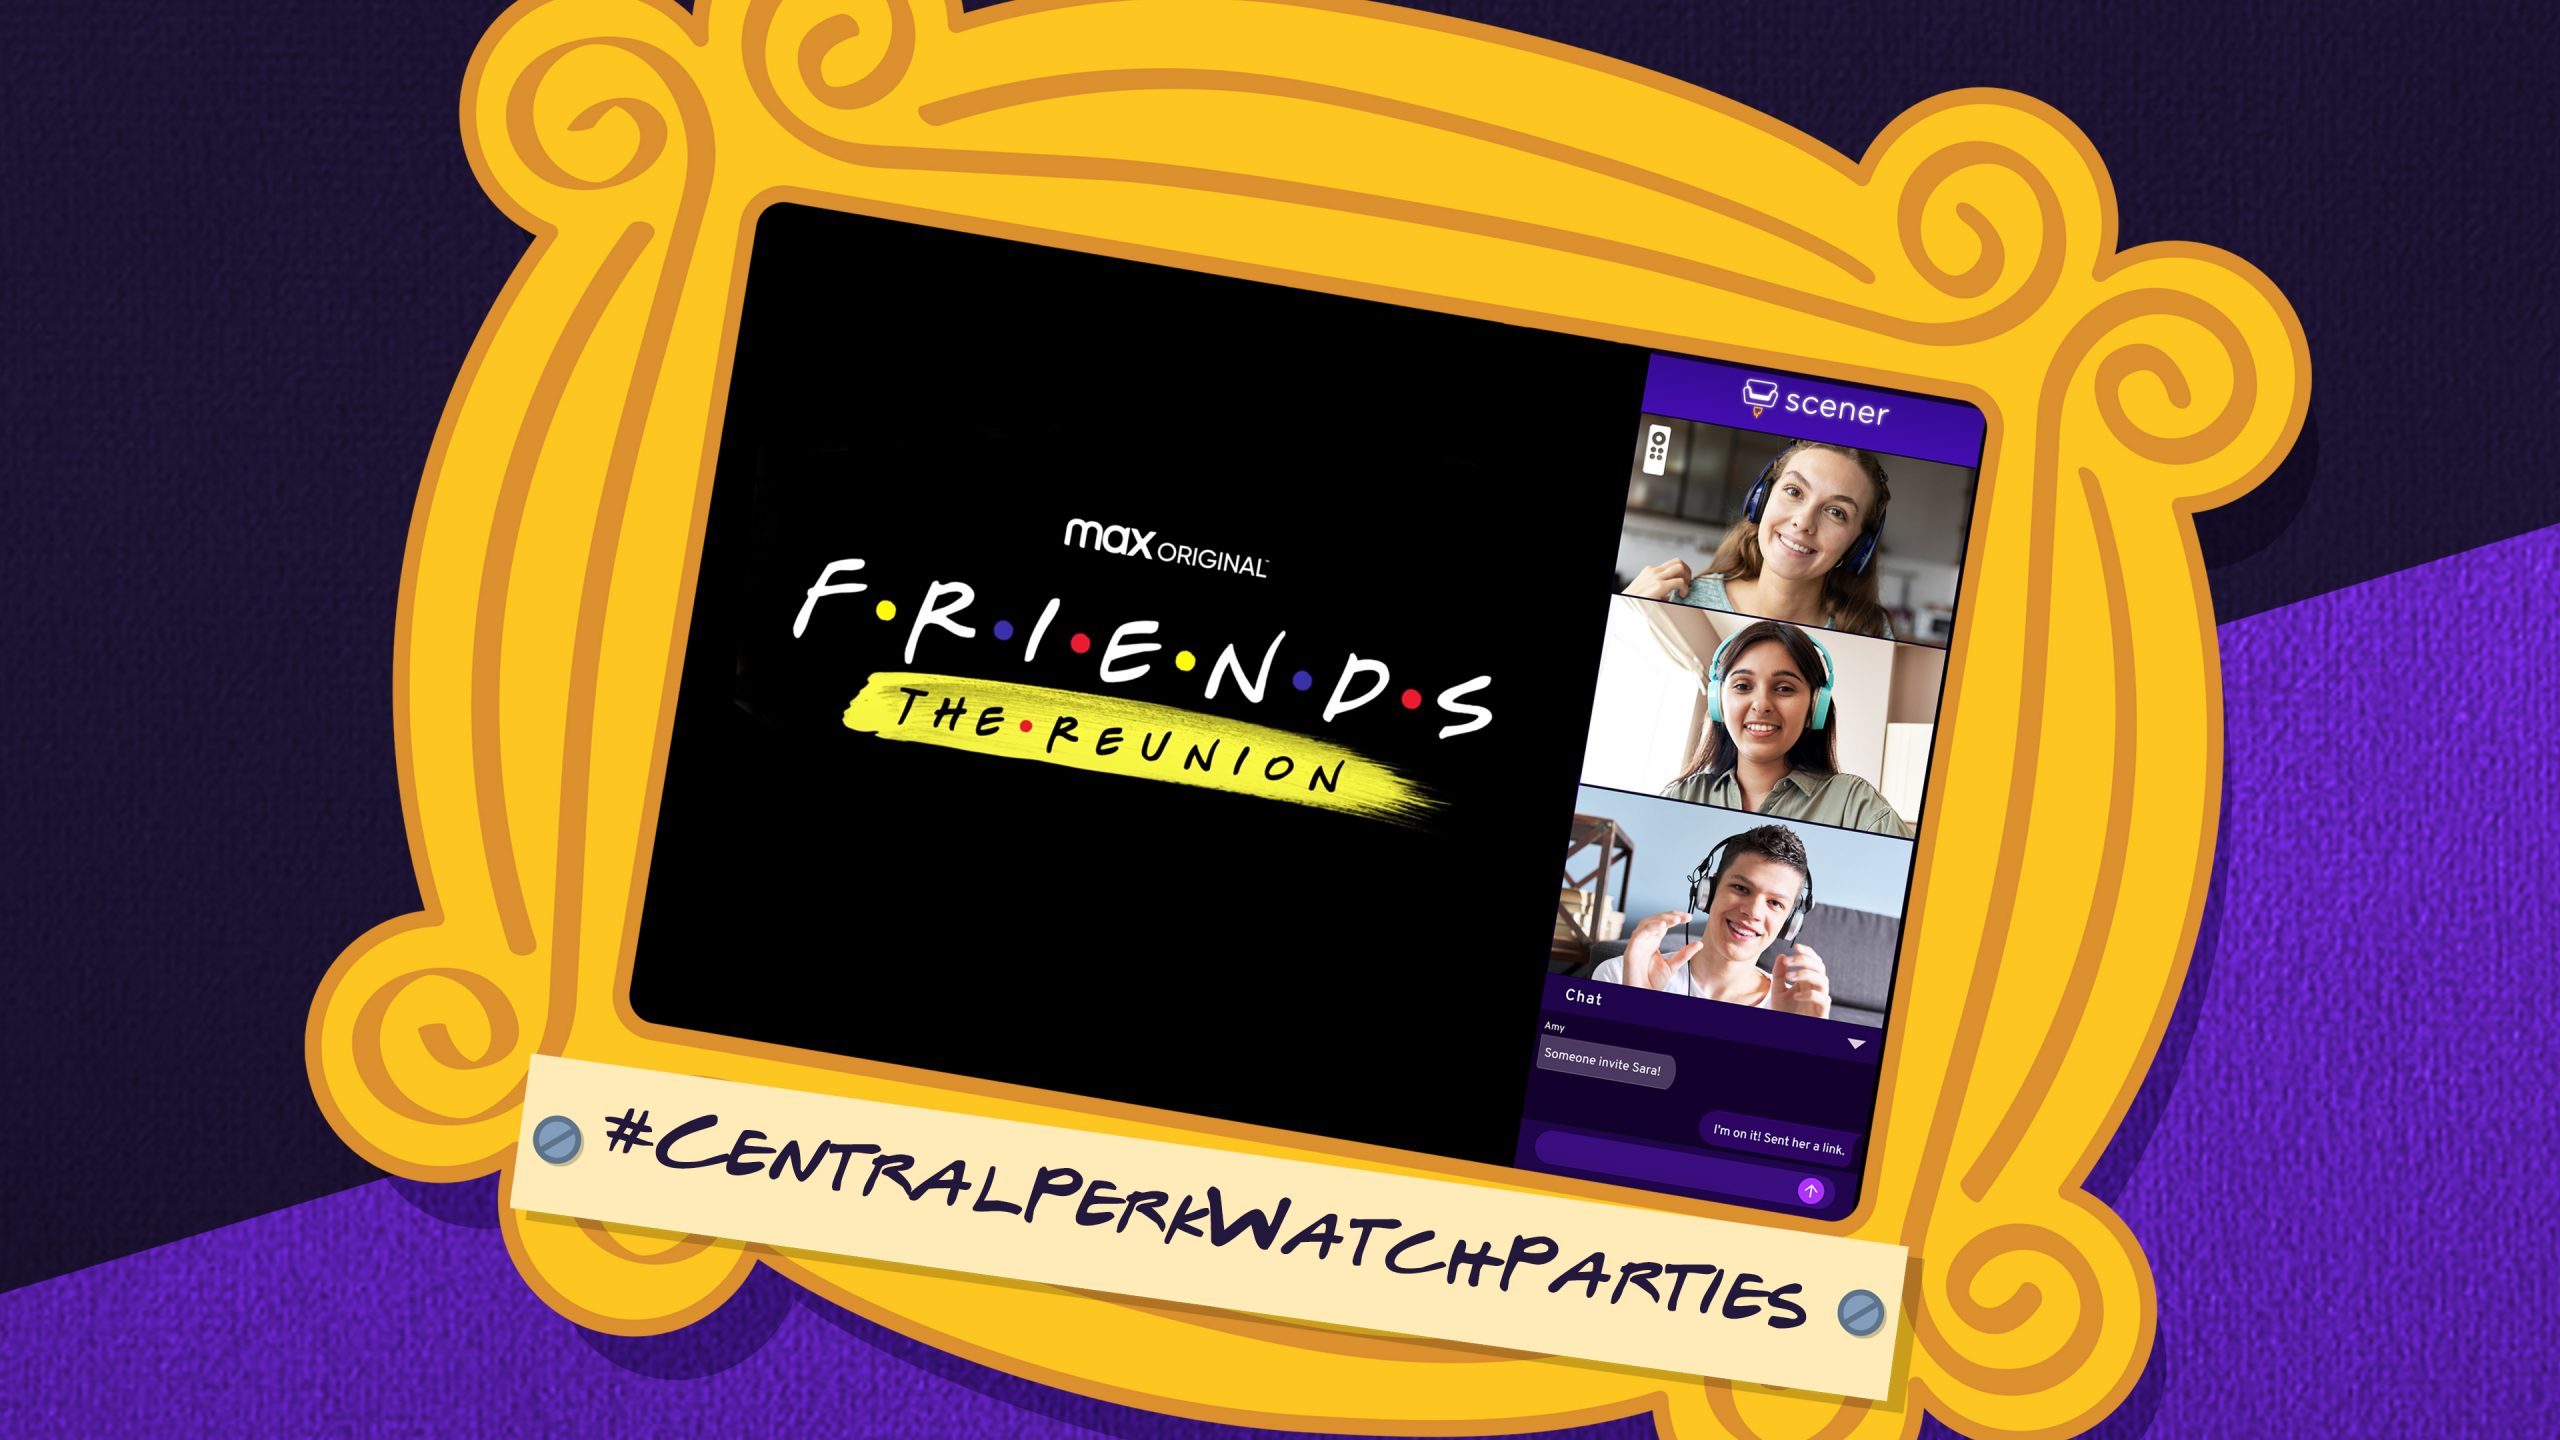 There's Now a Website to Plan HBO's FRIENDS Reunion Online Watching Parties!